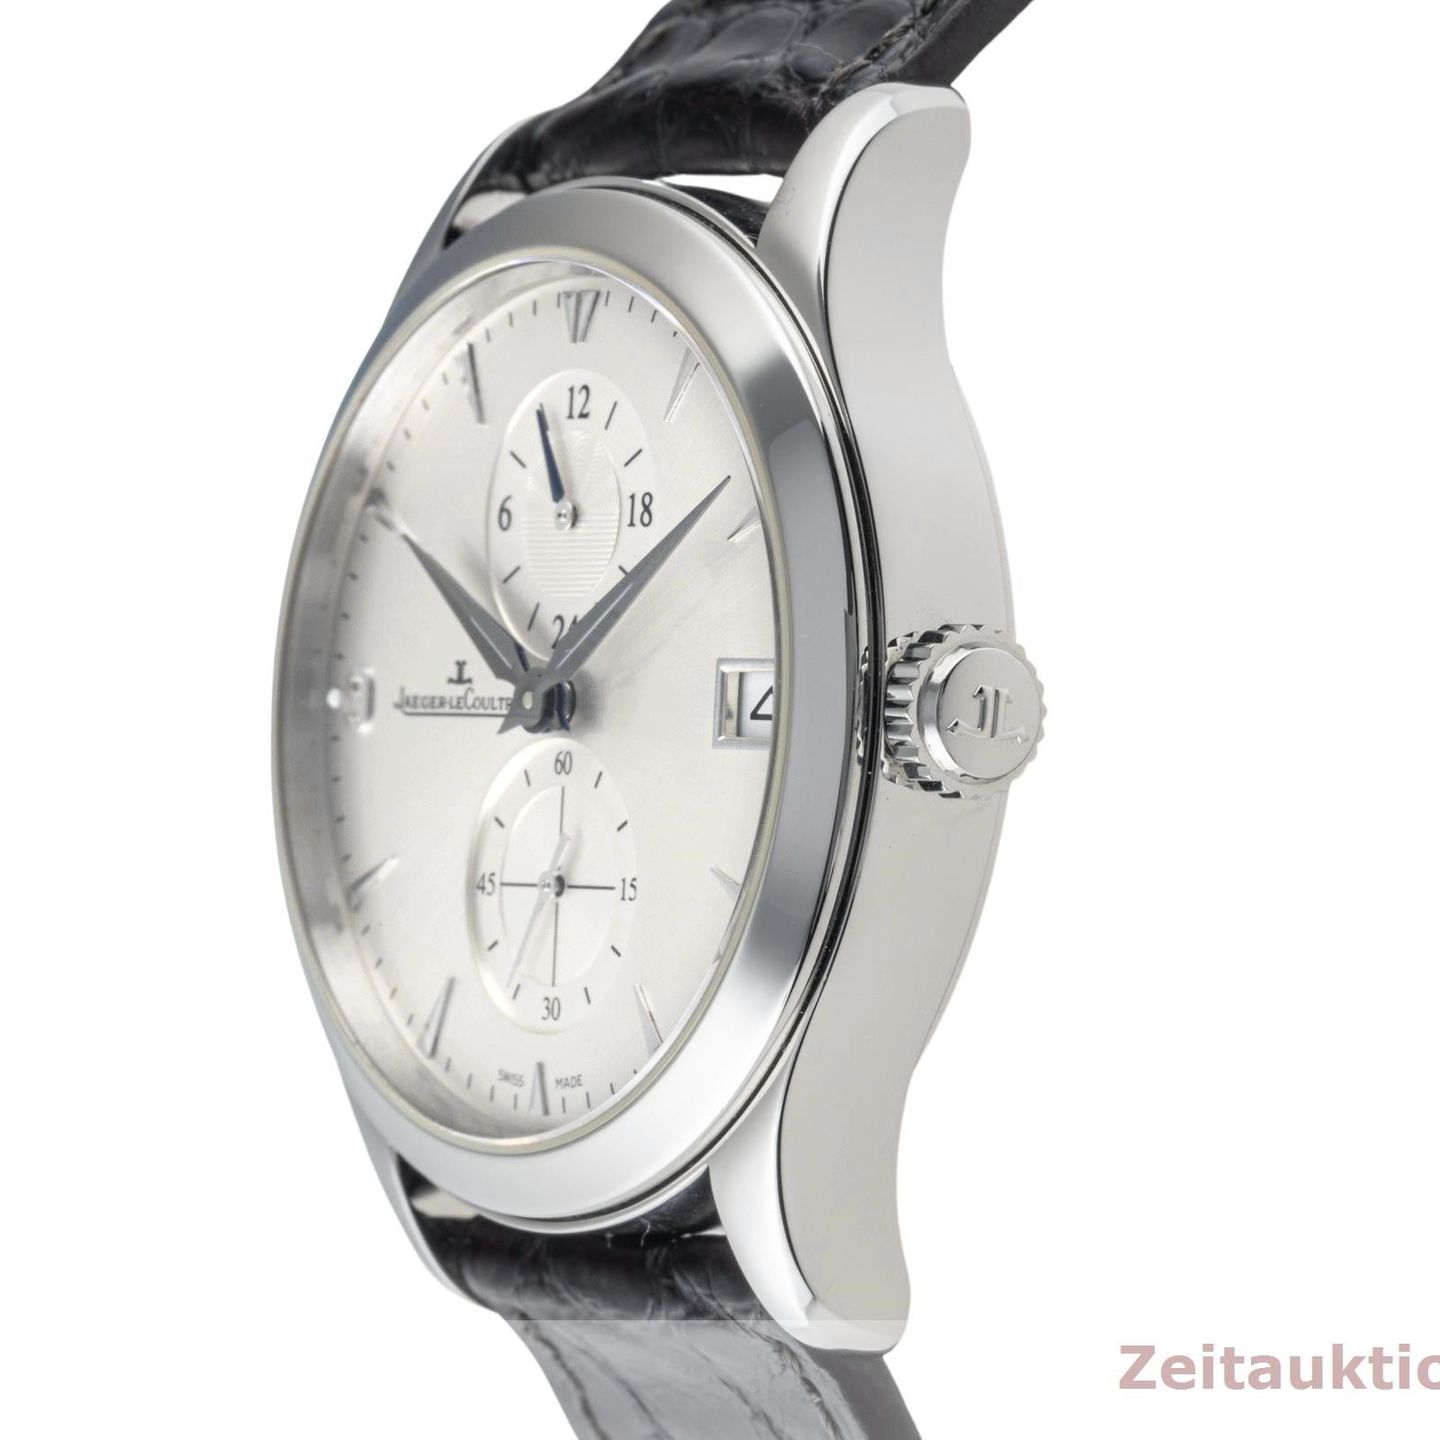 Jaeger-LeCoultre Master Control Q1628430   174.8.05.S (Unknown (random serial)) - Silver dial 40 mm Steel case (6/8)